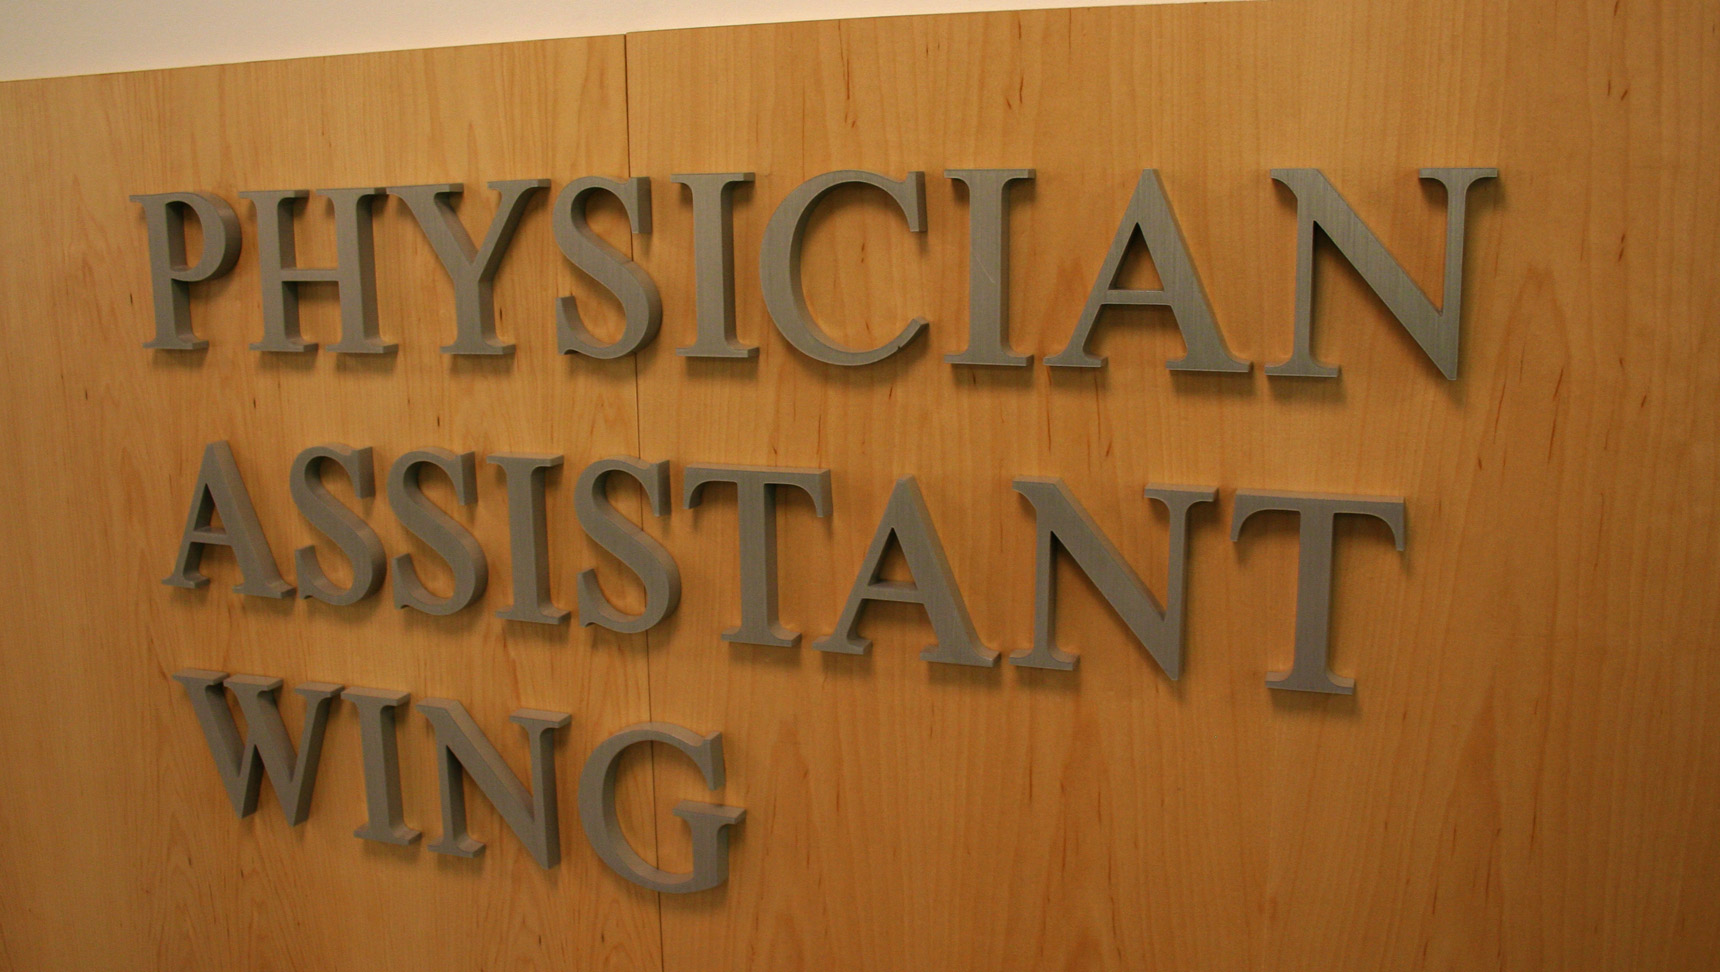 Welcome to the Physician Assistant Wing.